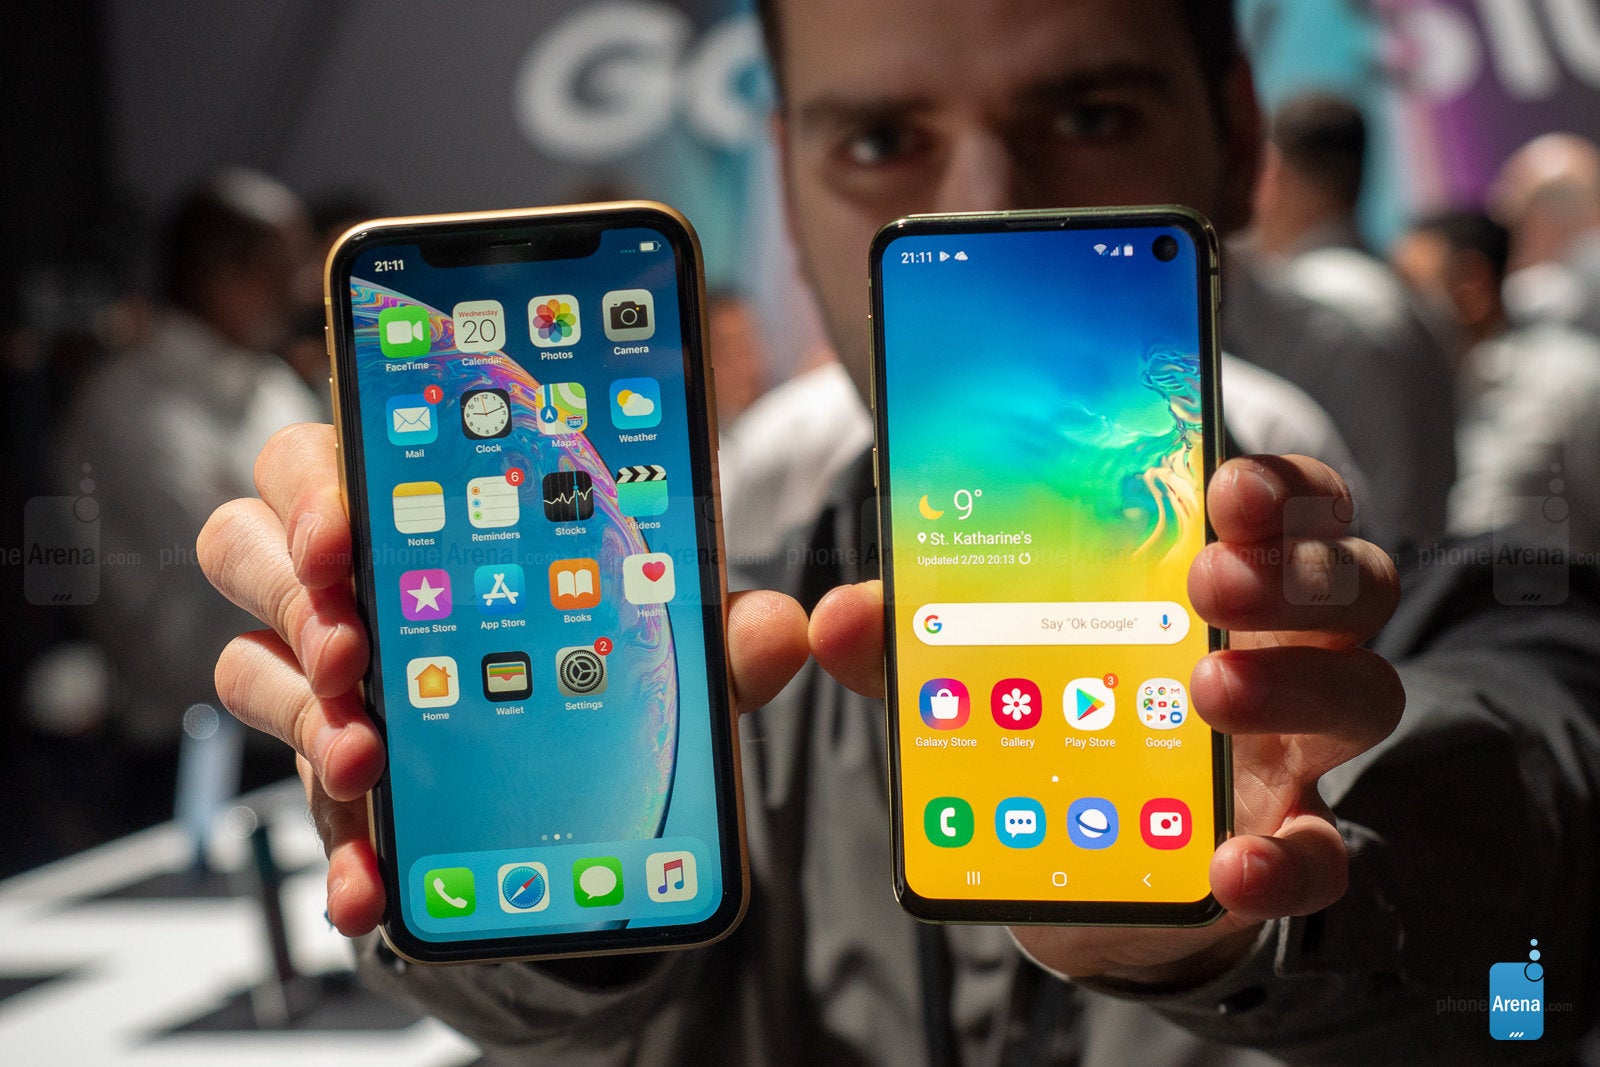 Samsung Galaxy S10e vs iPhone XR: does Samsung's $750 offer trample over Apple's "budget" iPhone?